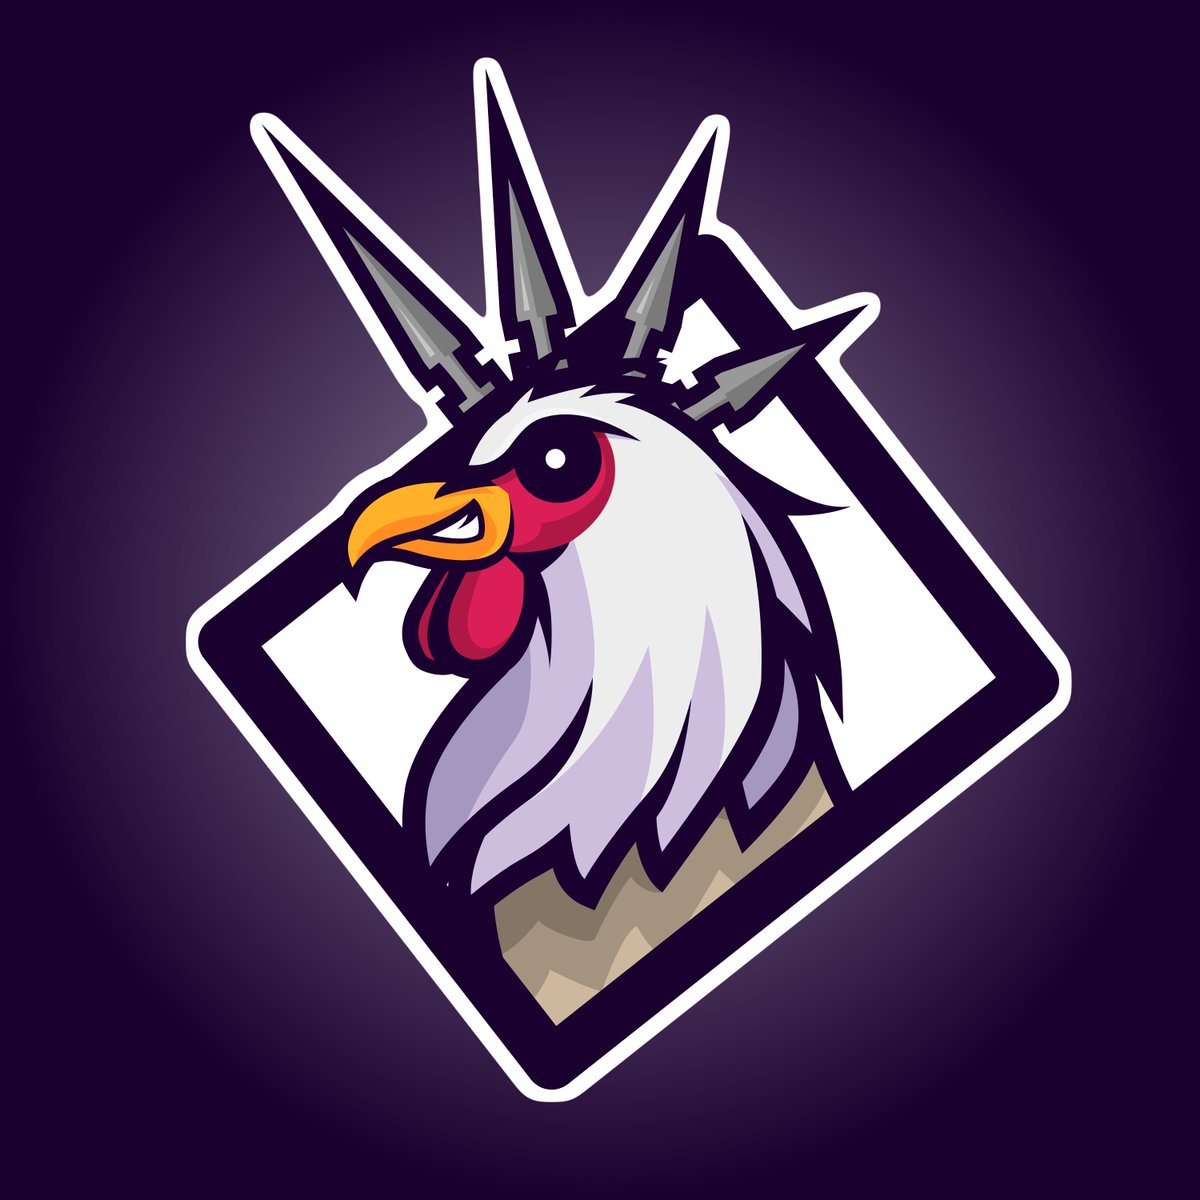 📢Do you have the punk attitude ?
🧐Discover the Rooster Collection. 
▶️Crest : Metal Punk
👀Eye : furious
🐔Beak : Smile

@PulsarTransfer send 100000  $MEX to 200 reactions  #mvx #NFT #NFTcommunity #NFTCollection #NFTGaming #Roosterteeth